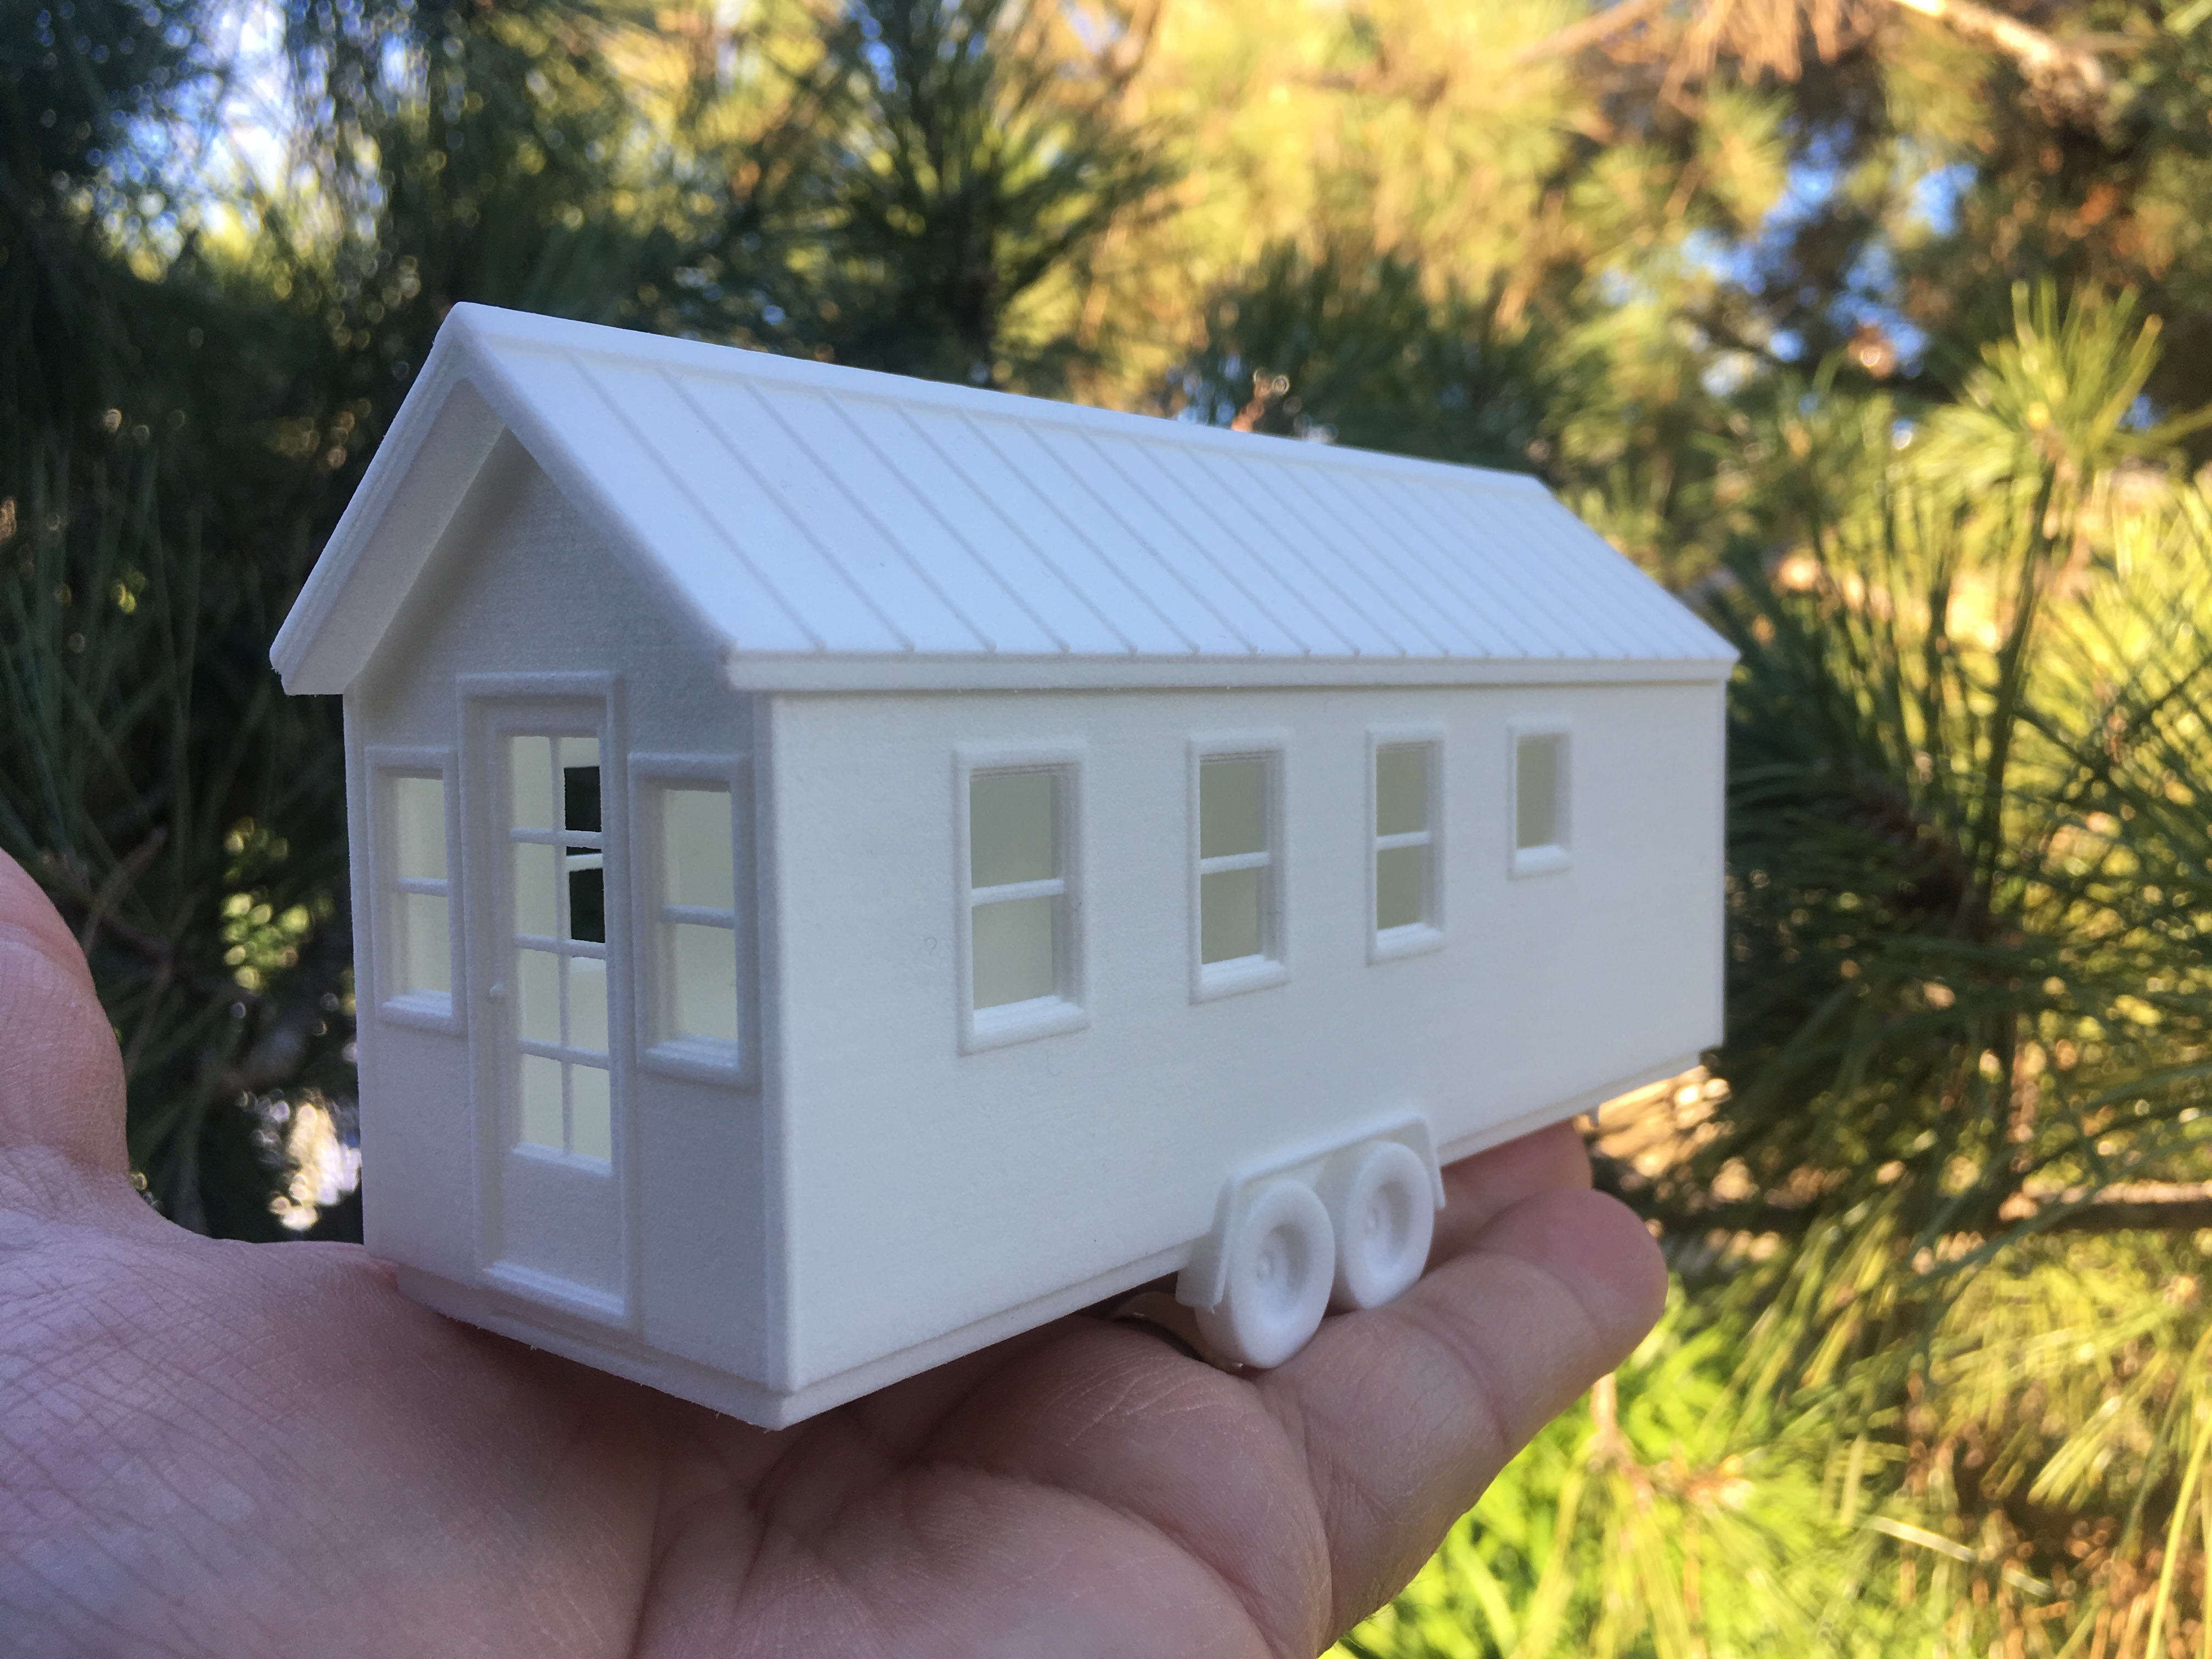 3D Printed Tiny House Model Coming Soon – Tiny House Design